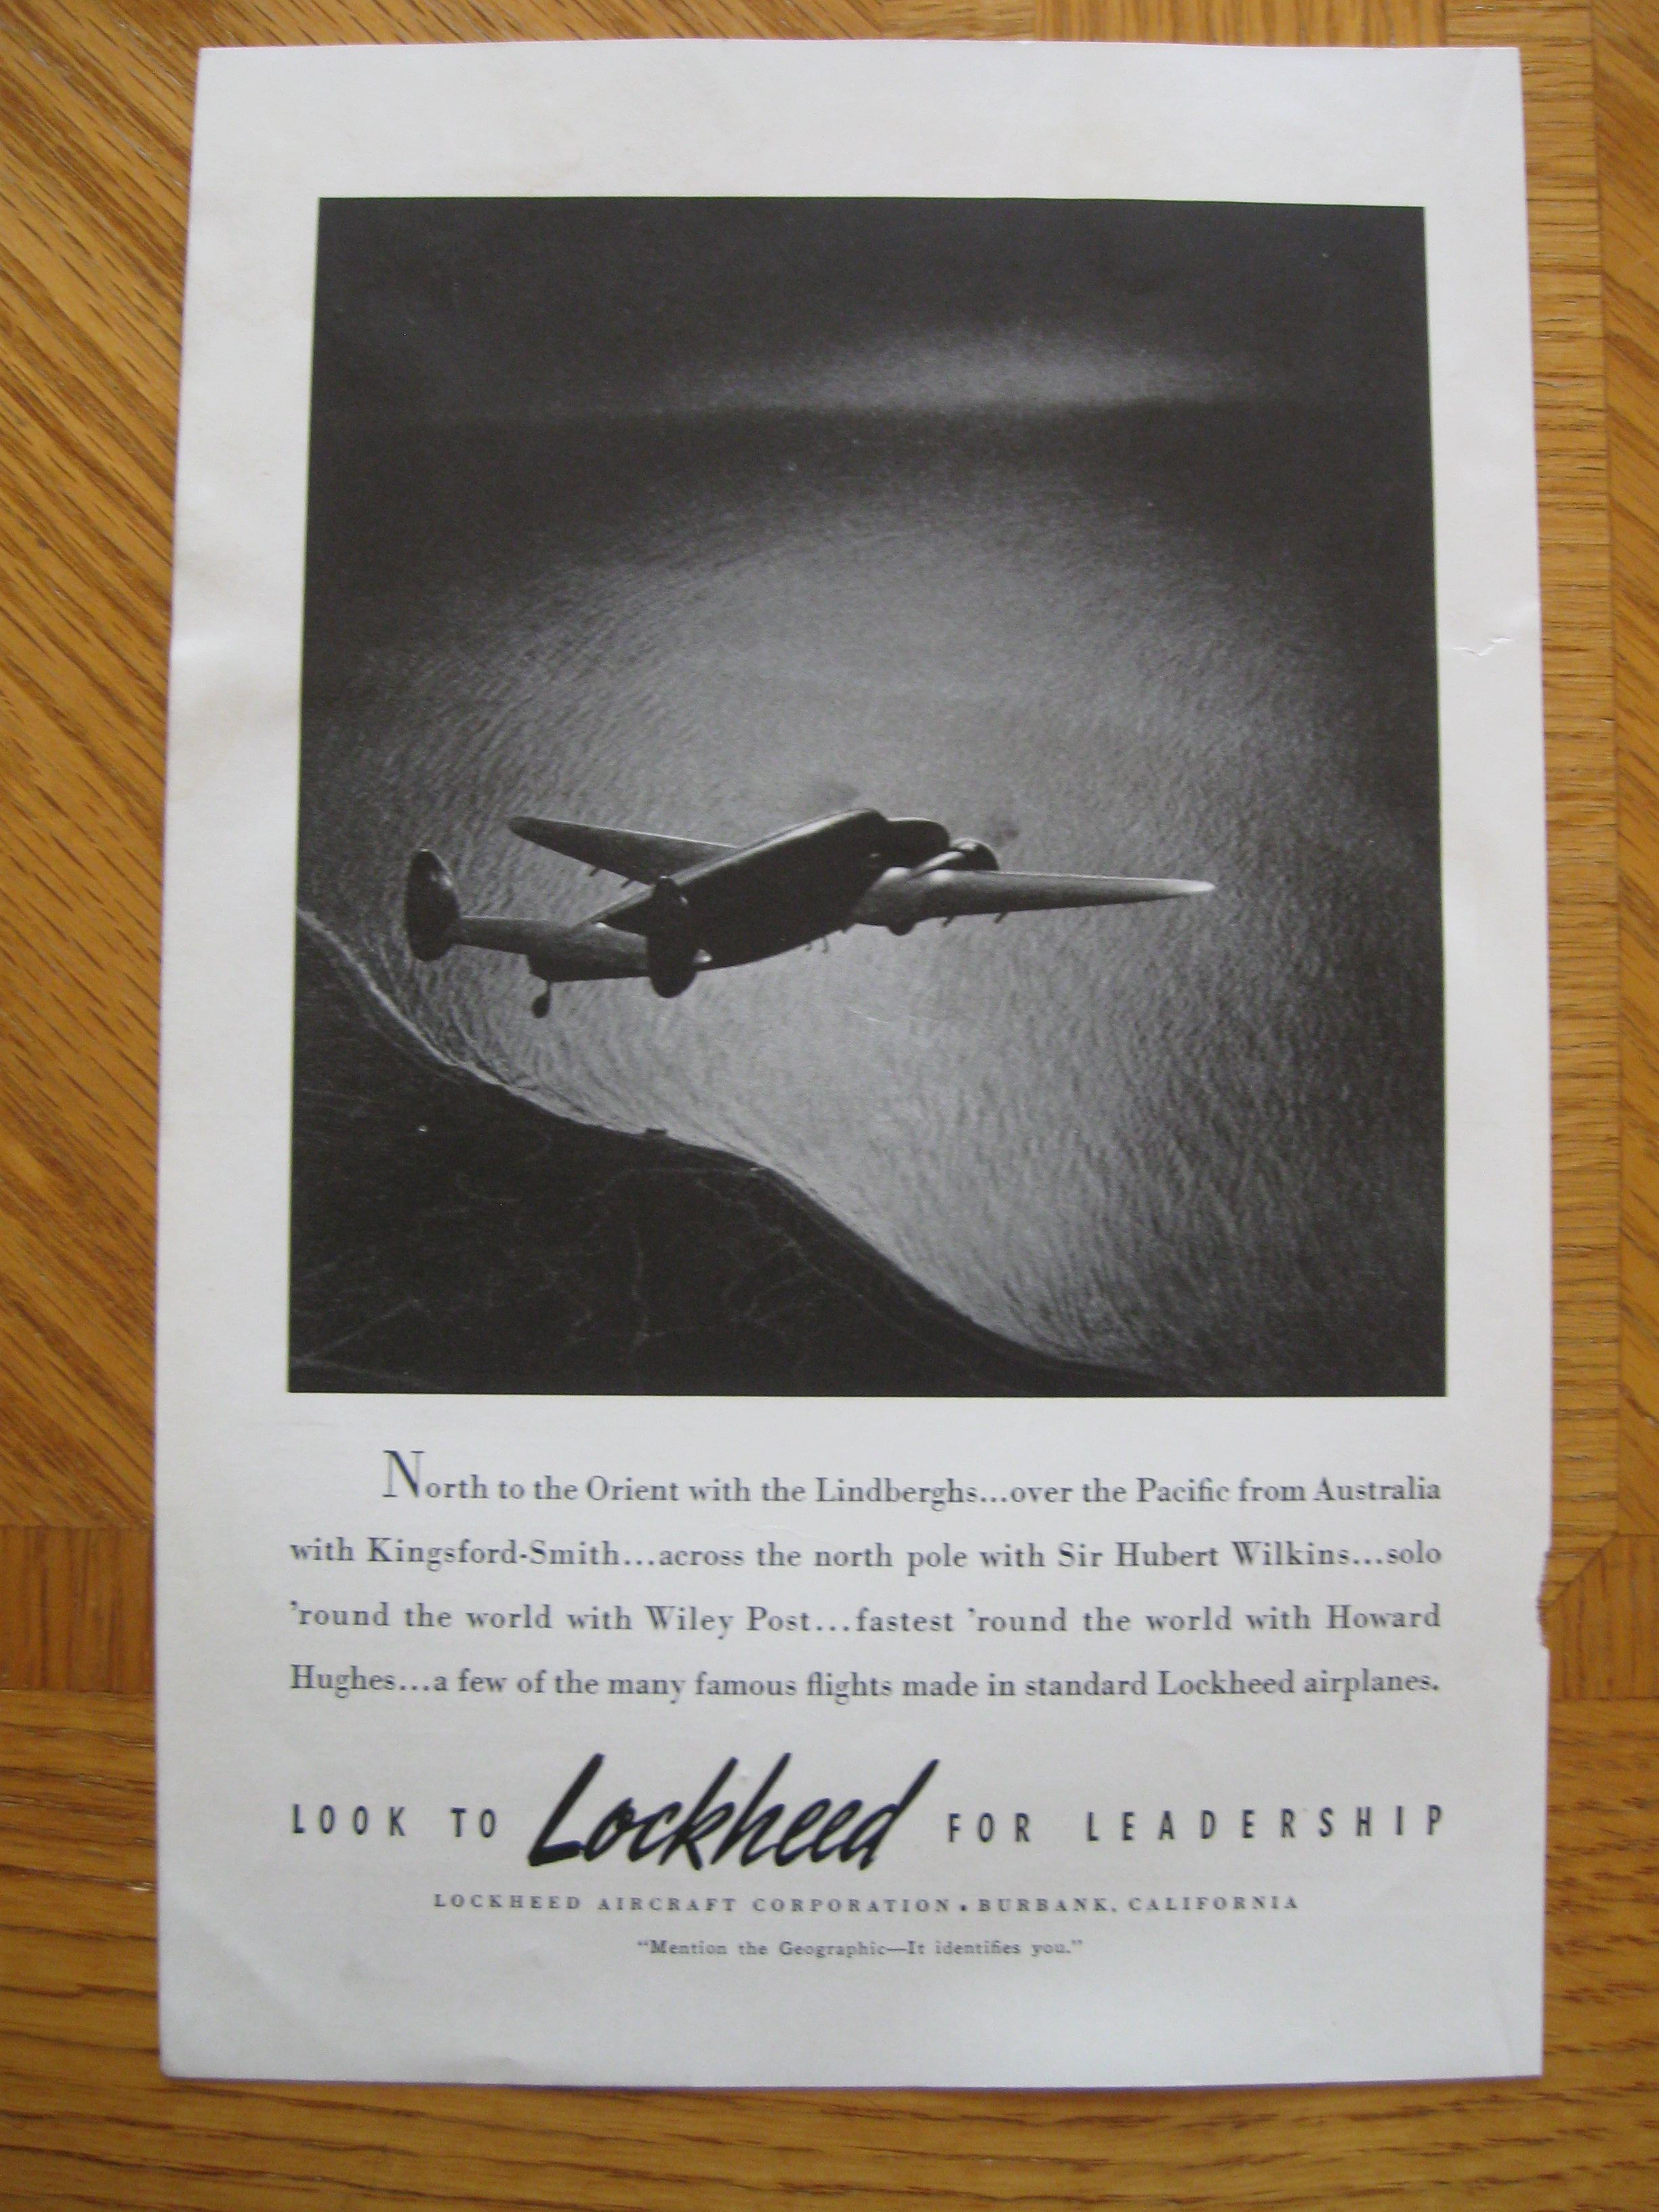 Look to Lockheed for leadership ad from national G